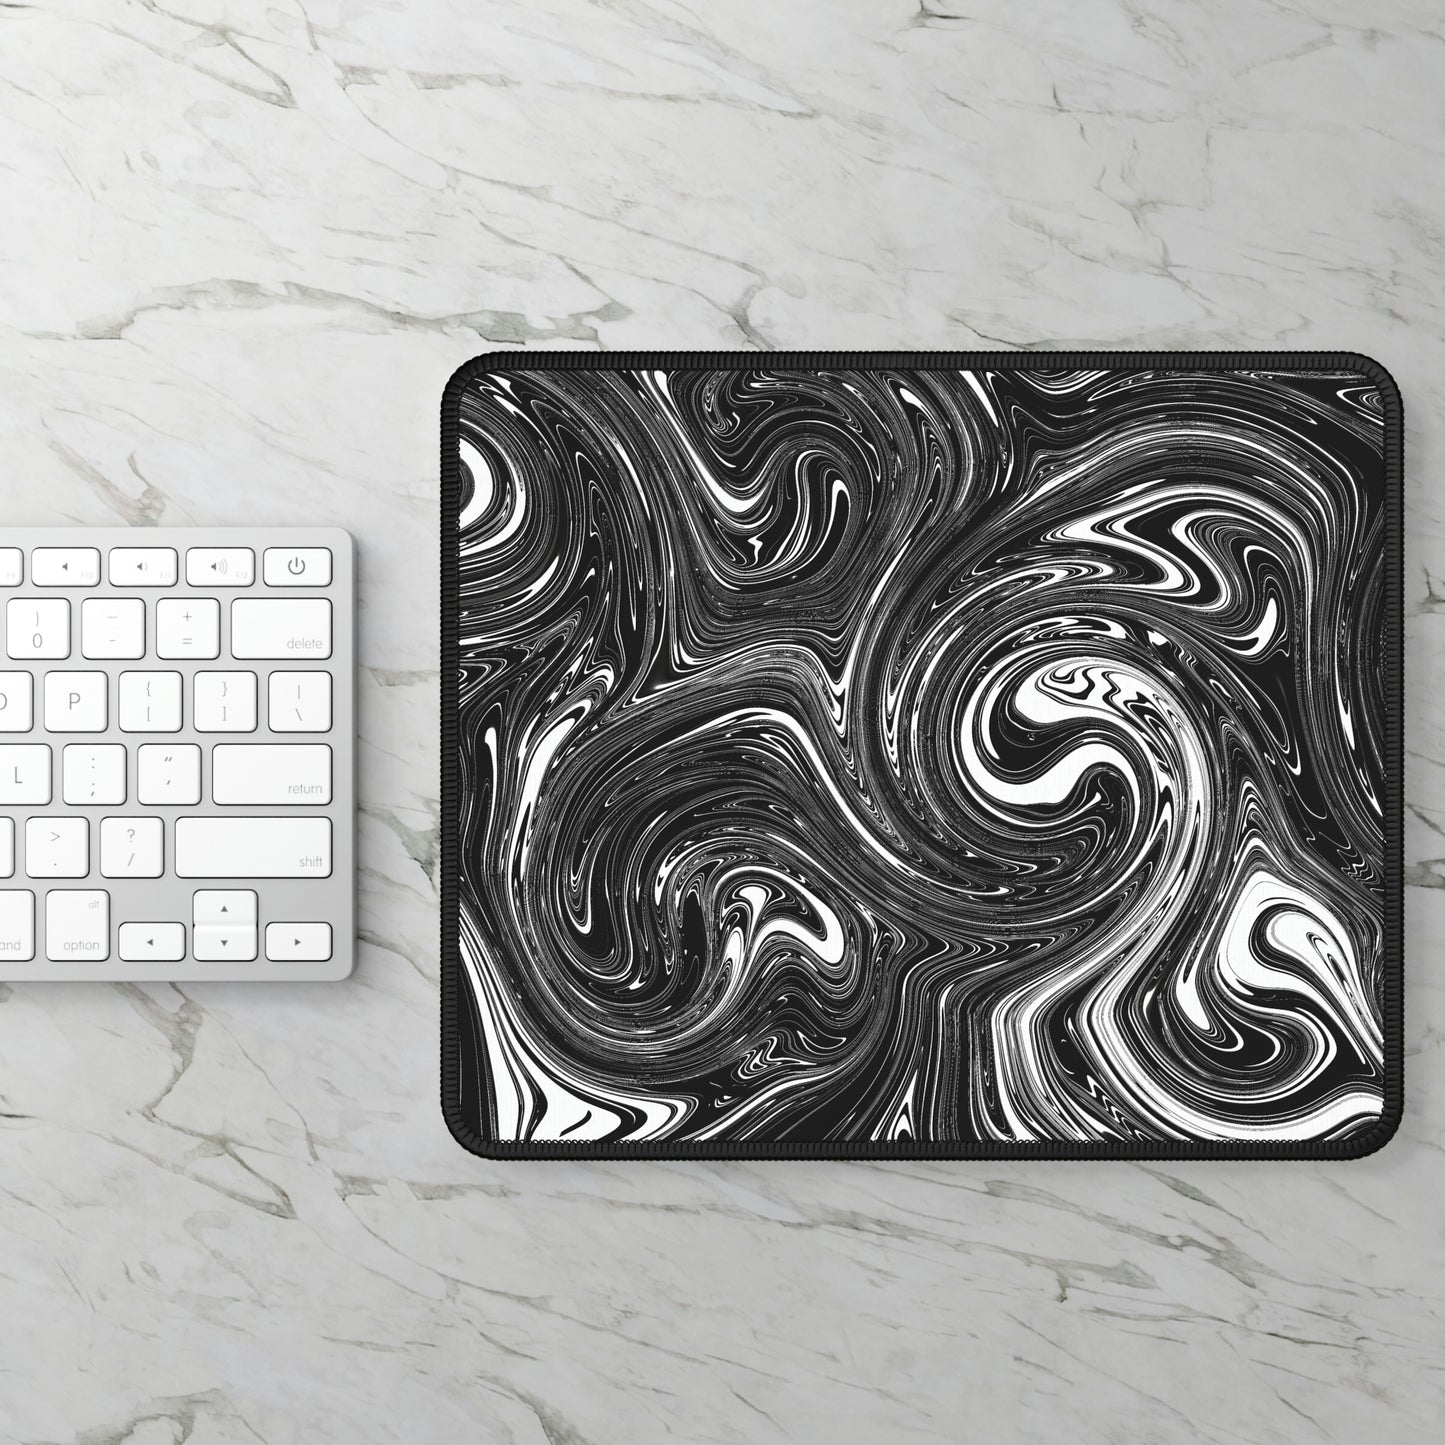 A gaming mouse pad with black and white swirls sitting next to a keyboard.